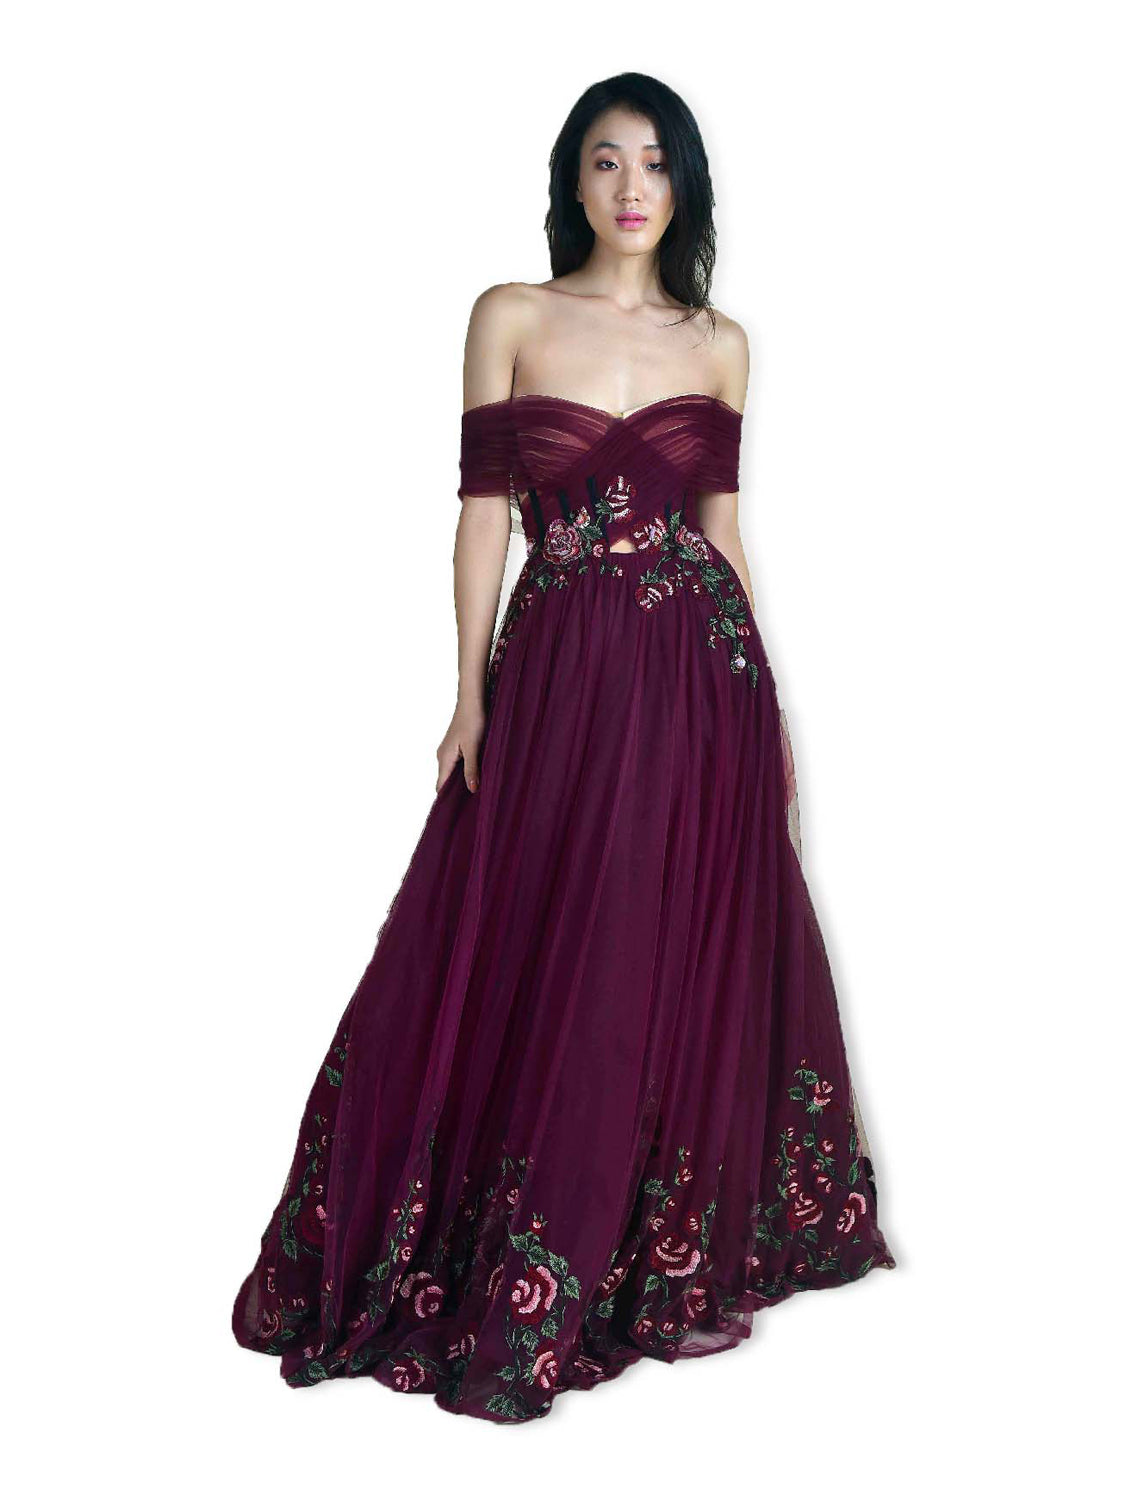 Rosarian Gown